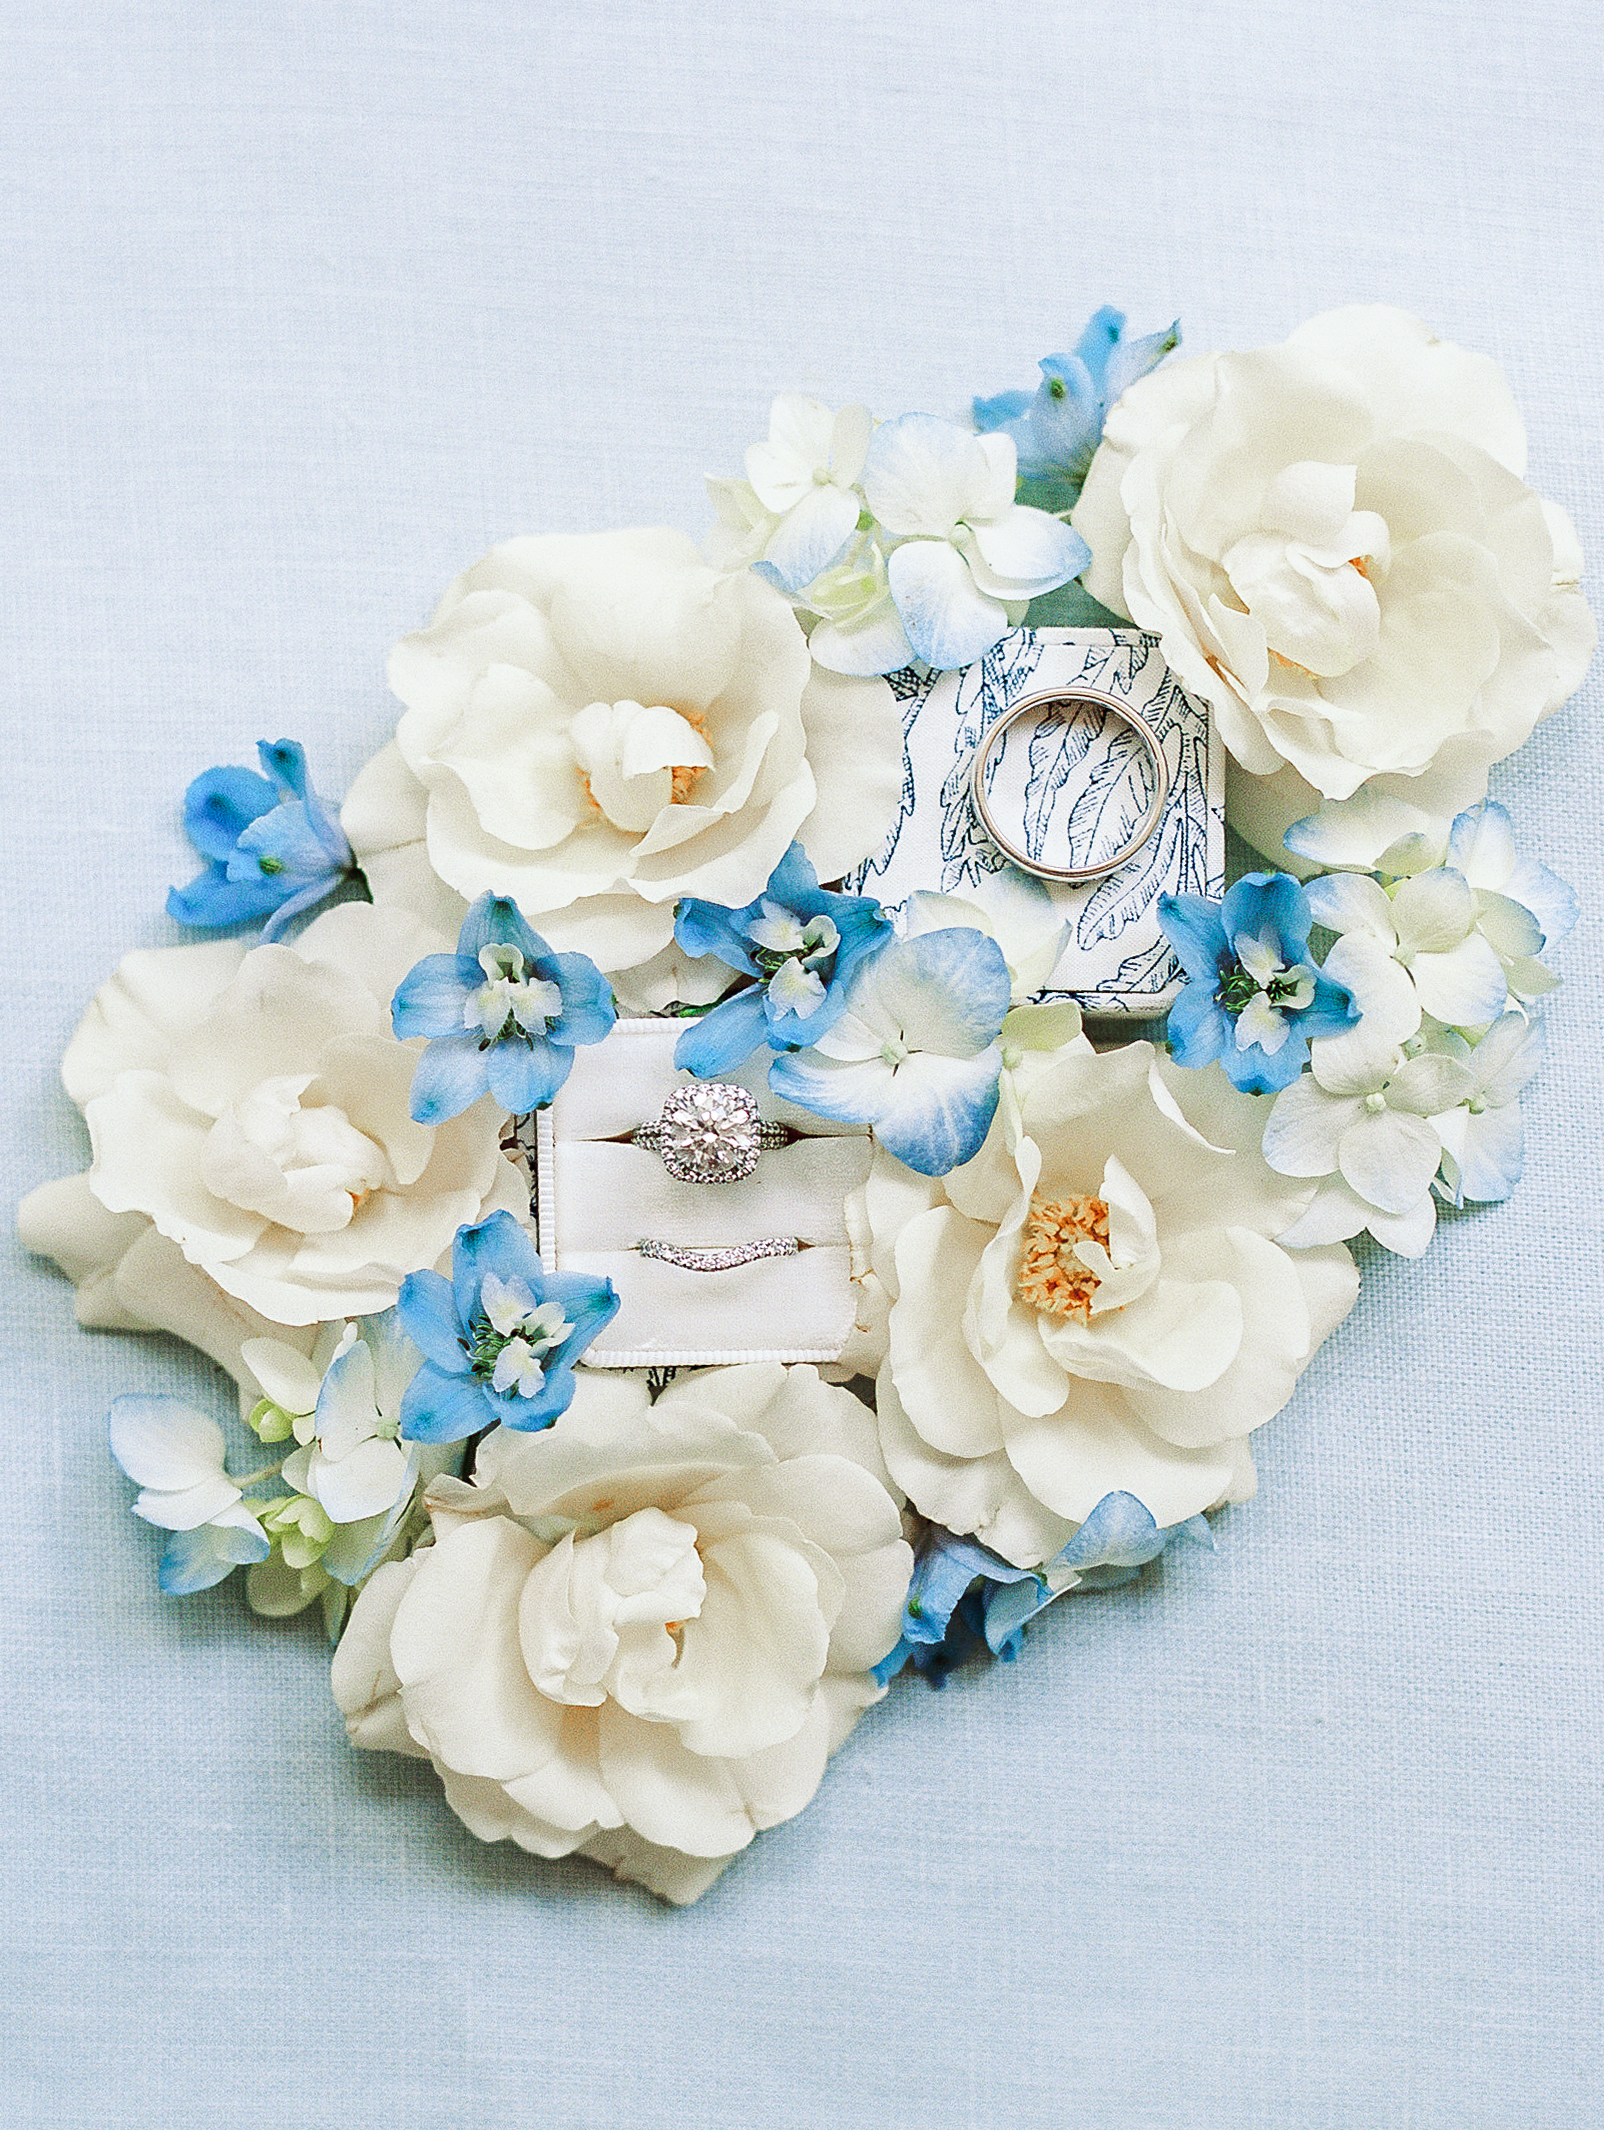 Wedding rings and white and blue flowers displayed neatly